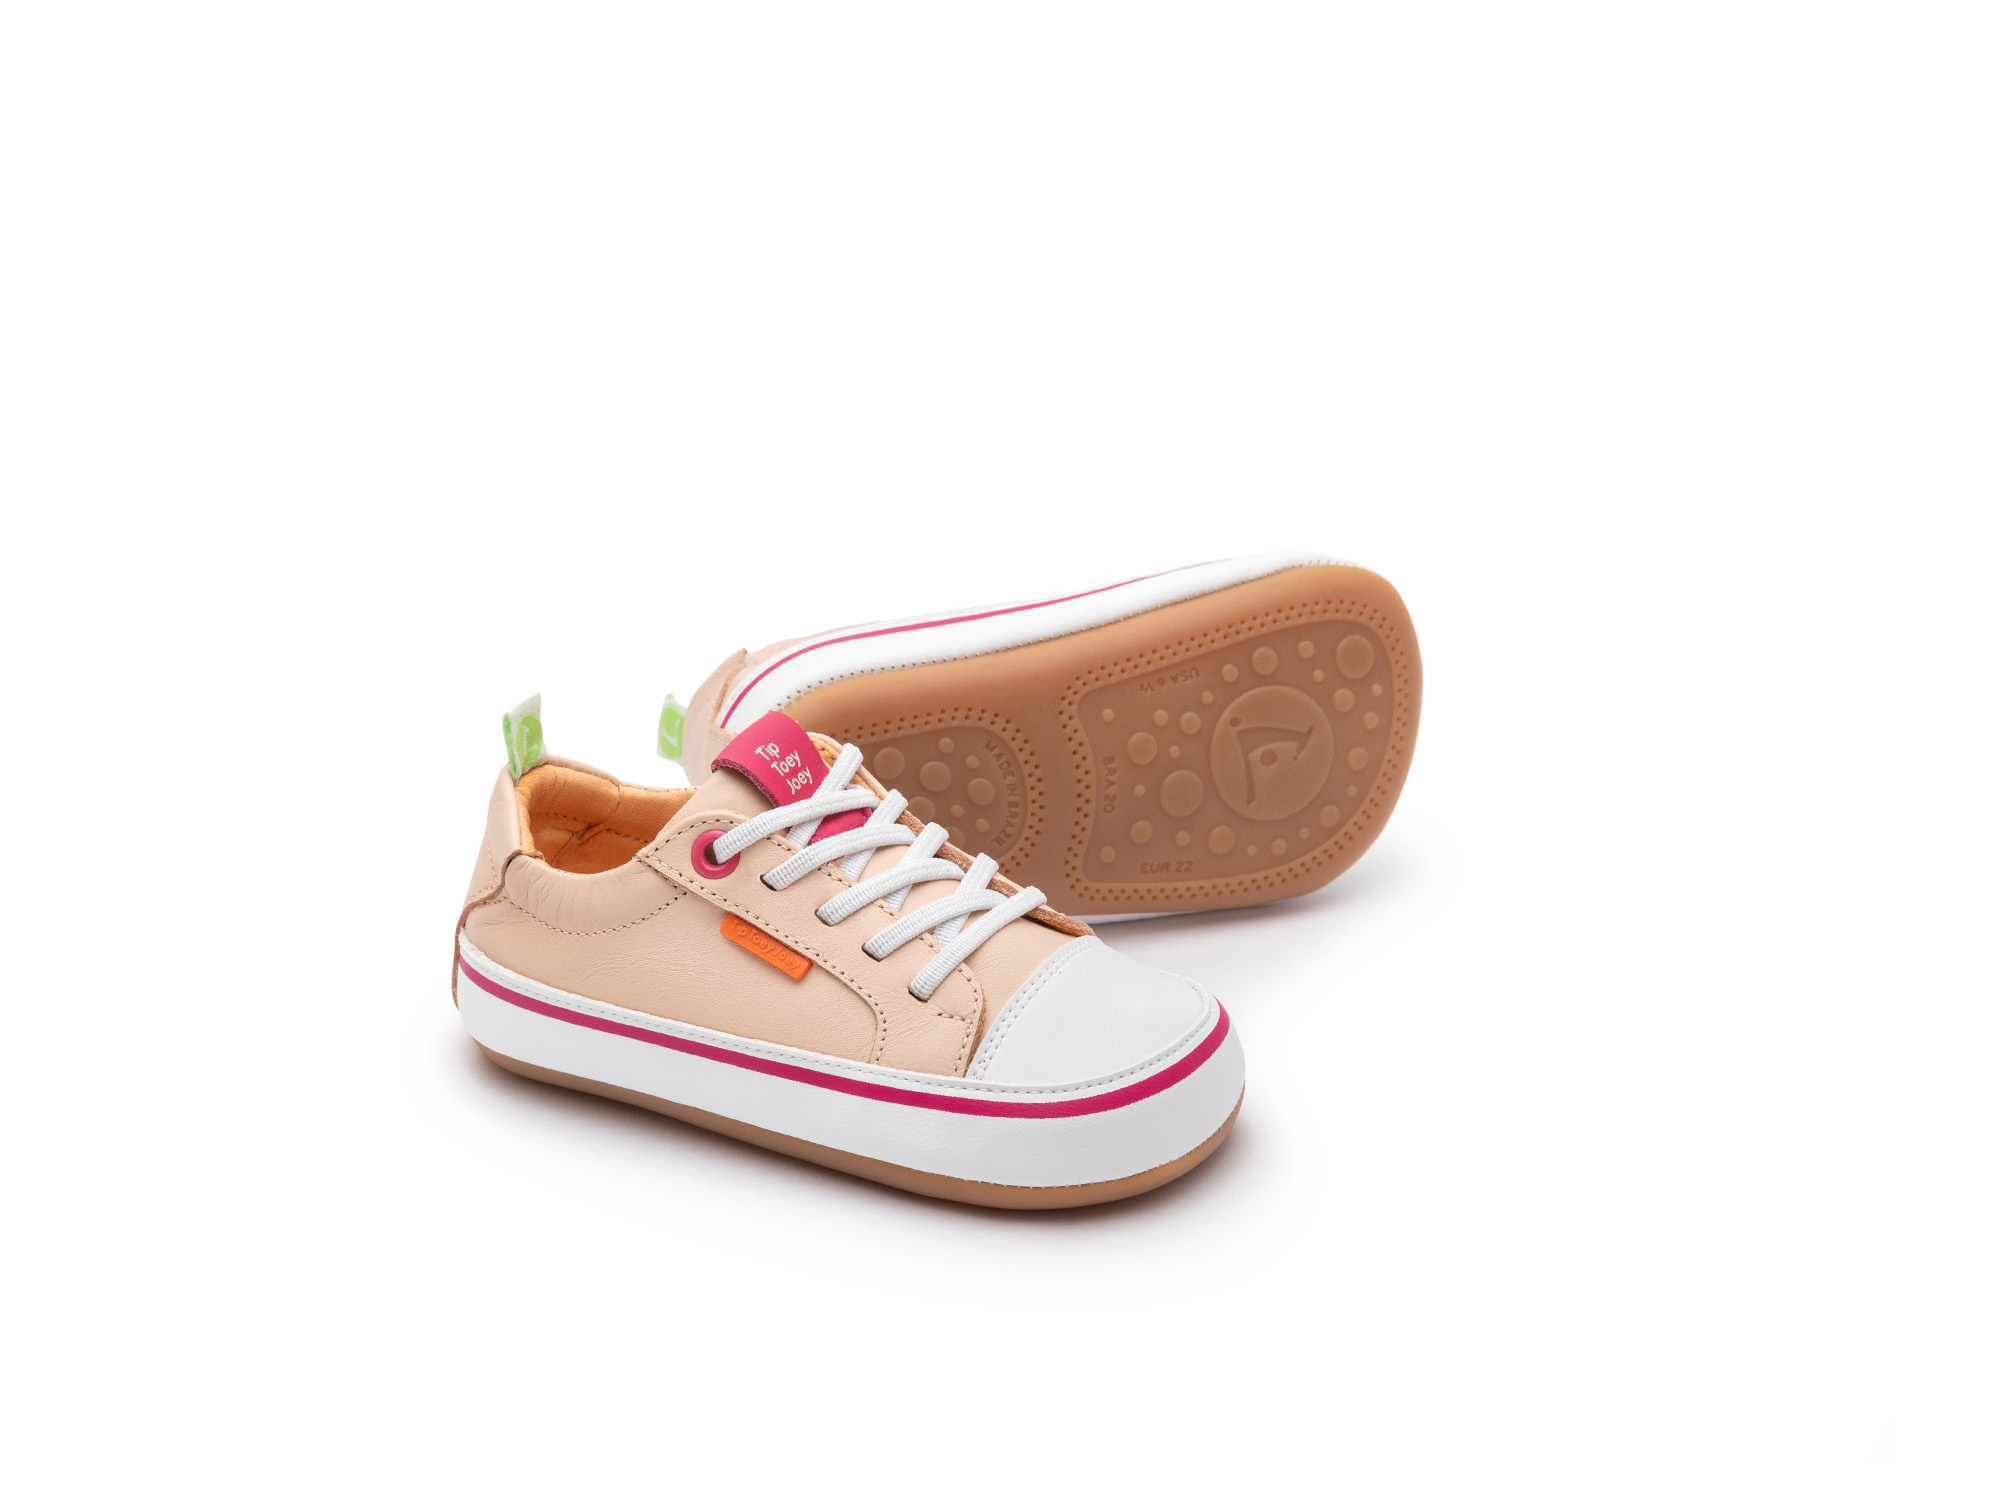 UP & GO Sneakers for Girls Funky Colors | Tip Toey Joey - Australia - 0